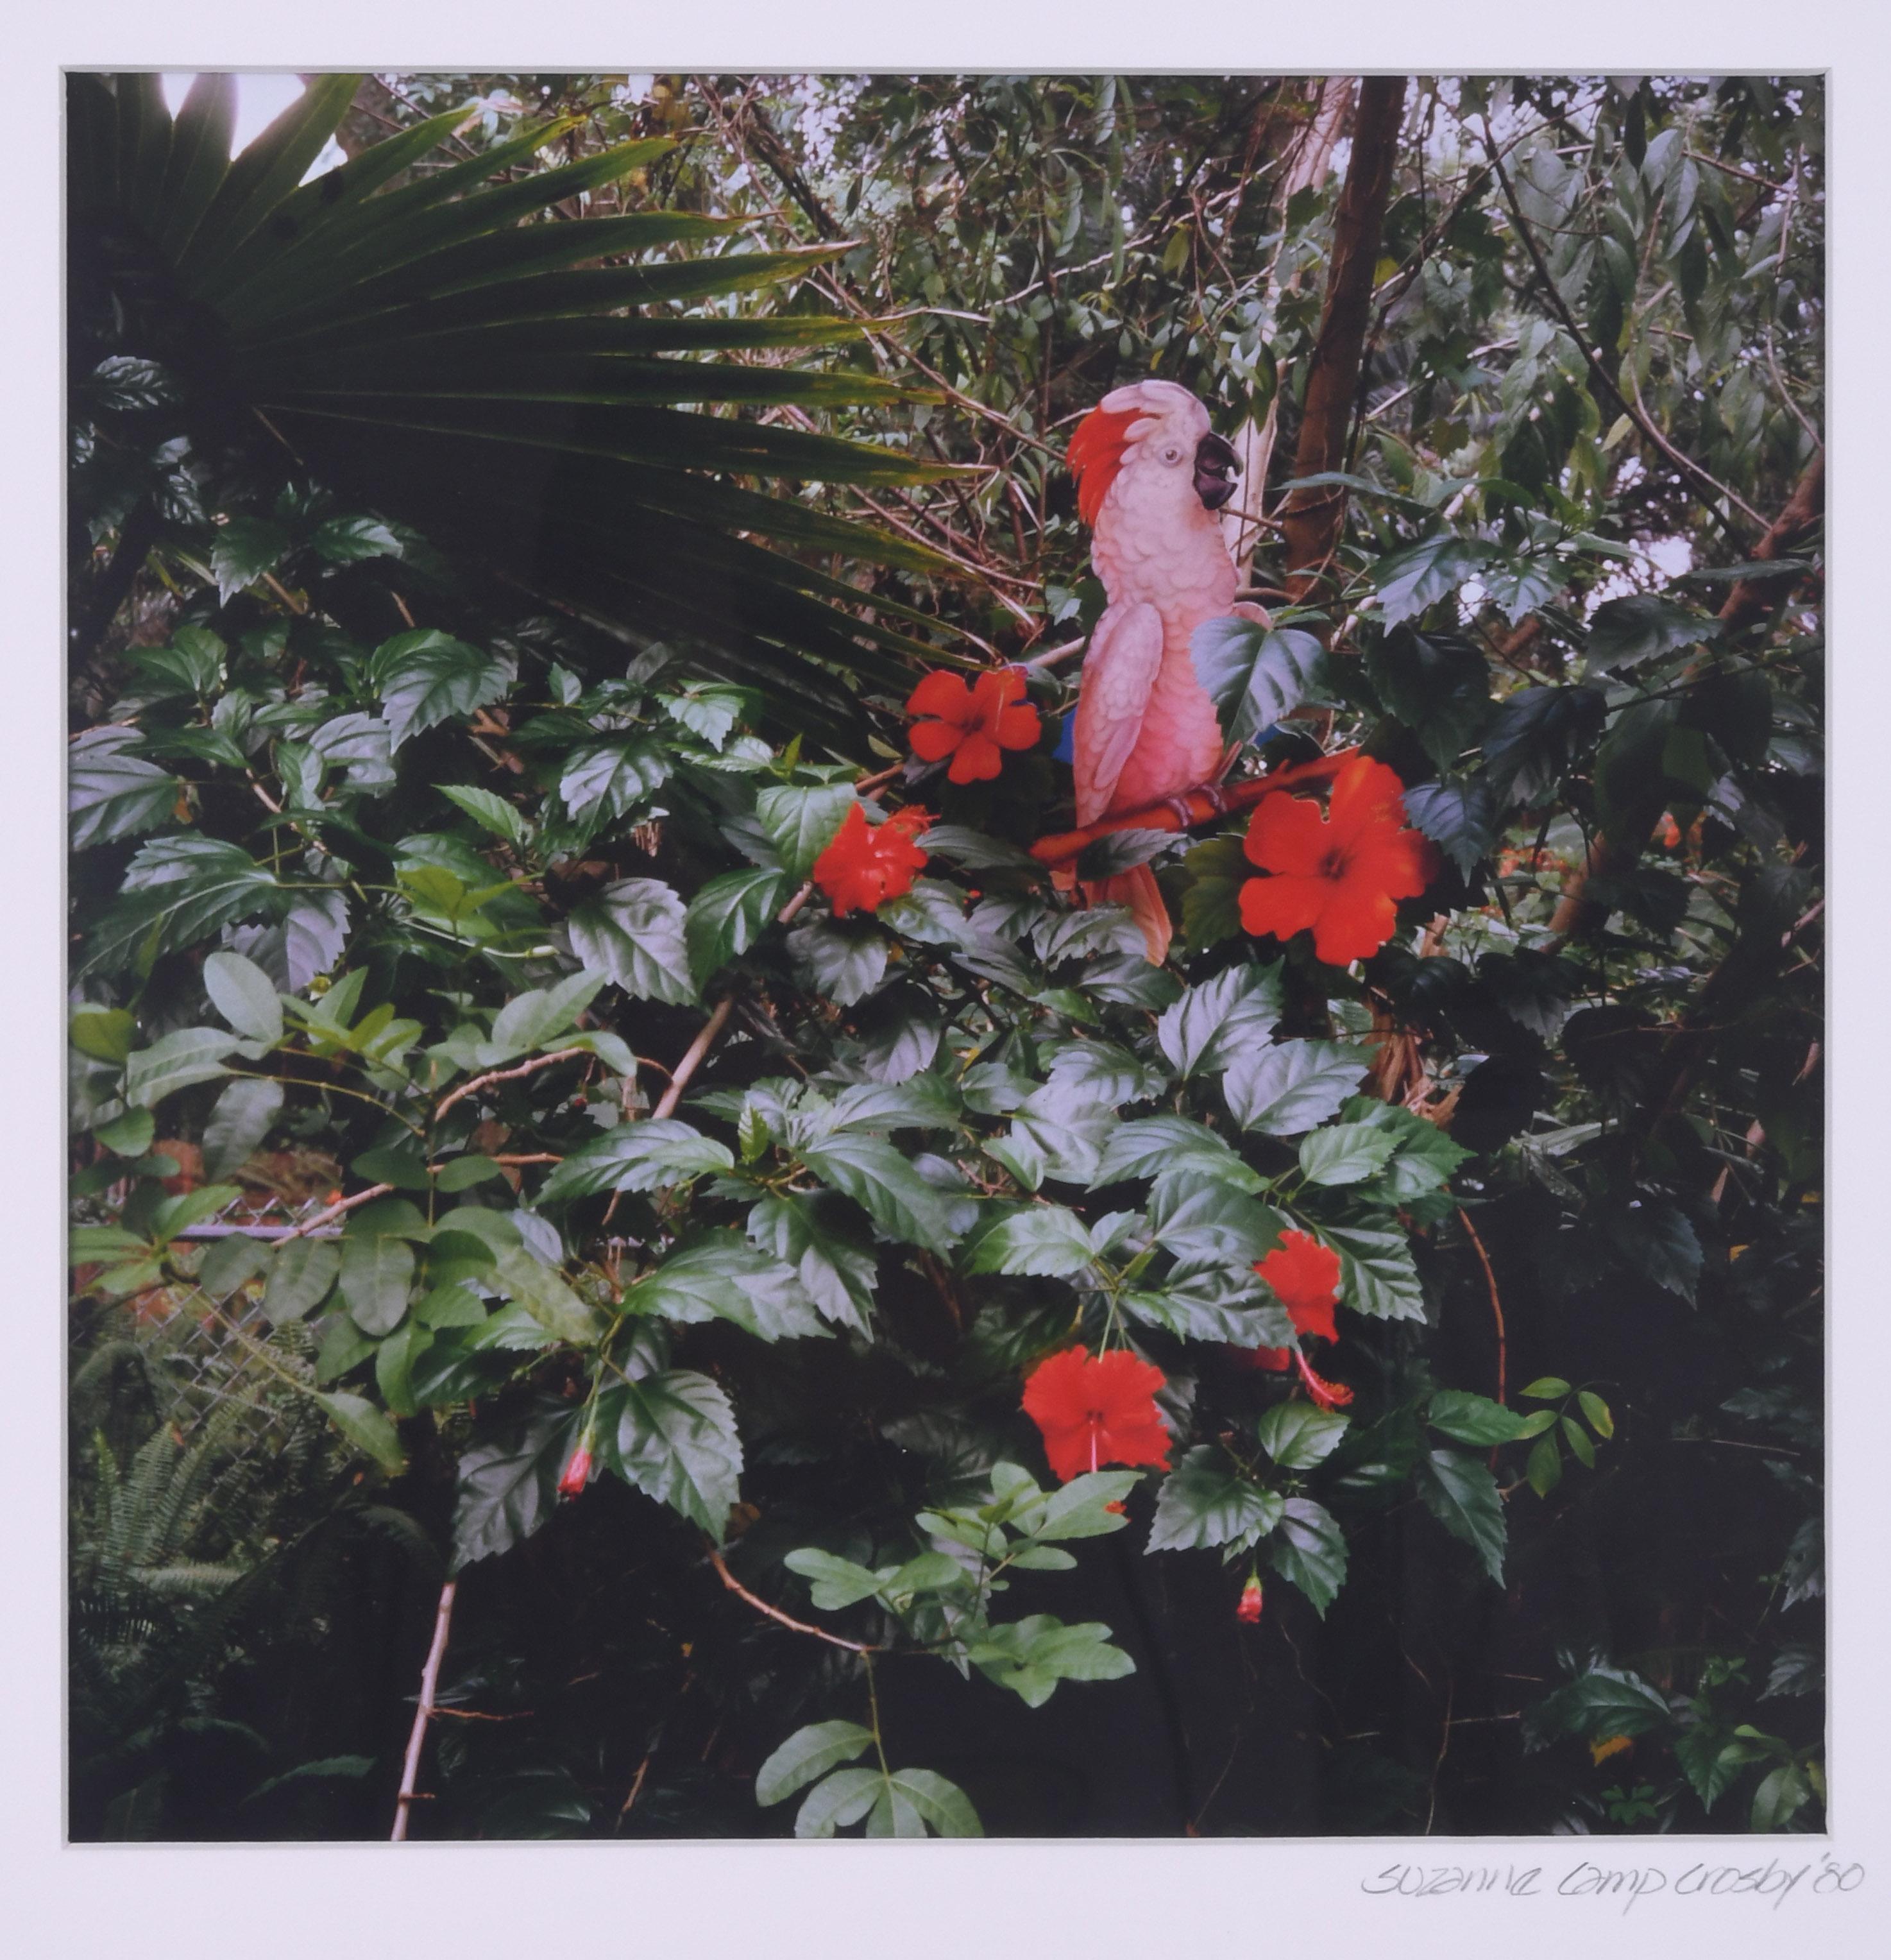 Suzanne Camp Crosby Landscape Photograph - Bird and Hibiscus